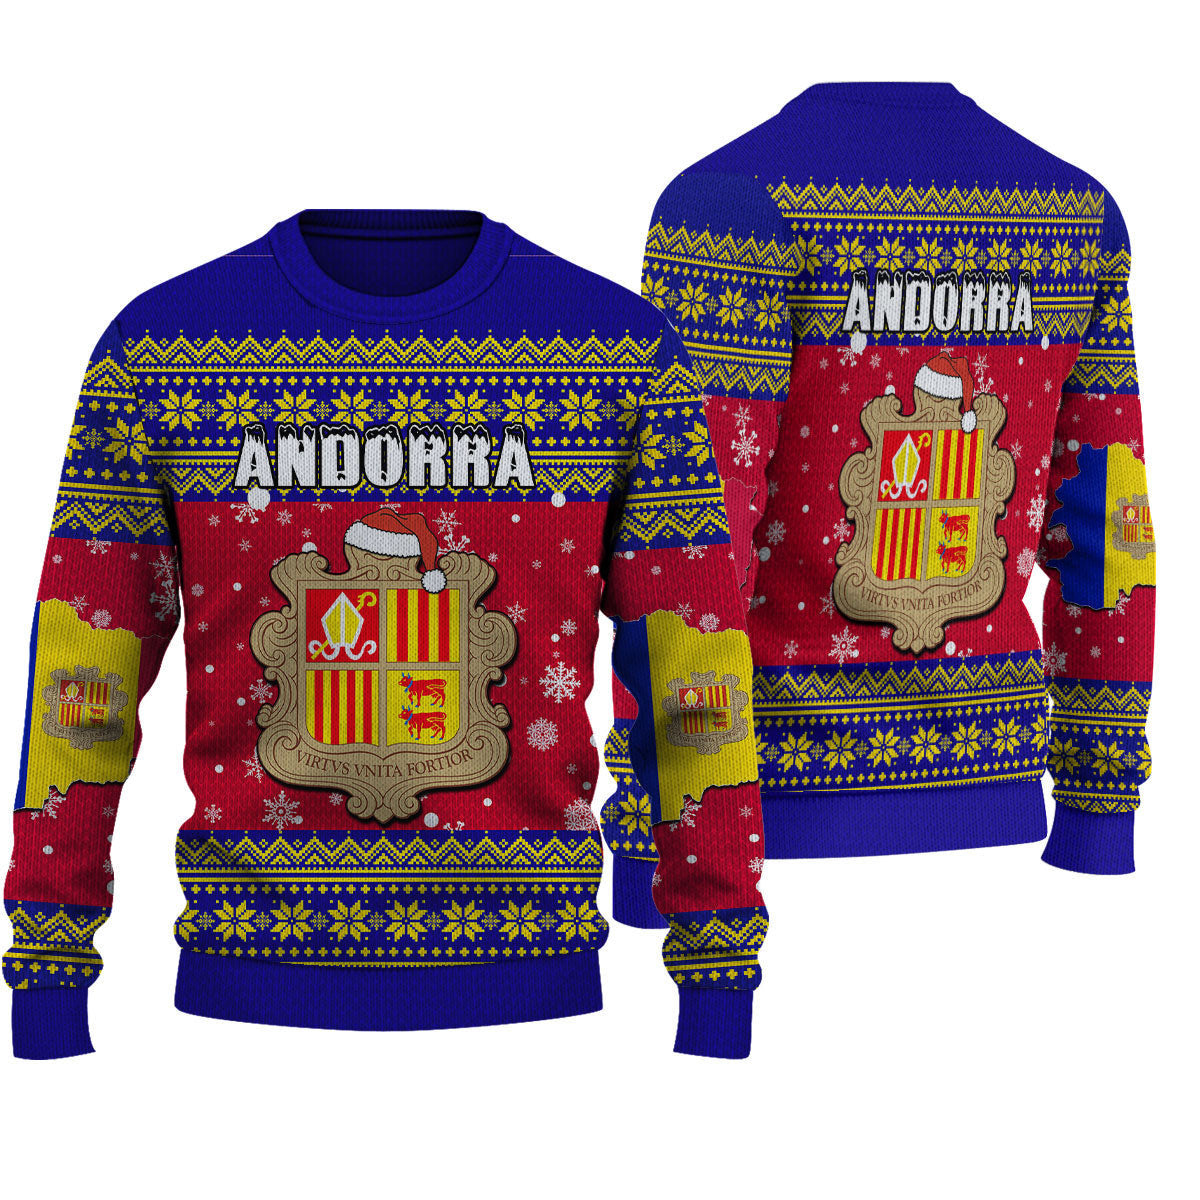 wonder-print-shop-ugly-sweater-andorra-christmas-knitted-sweater